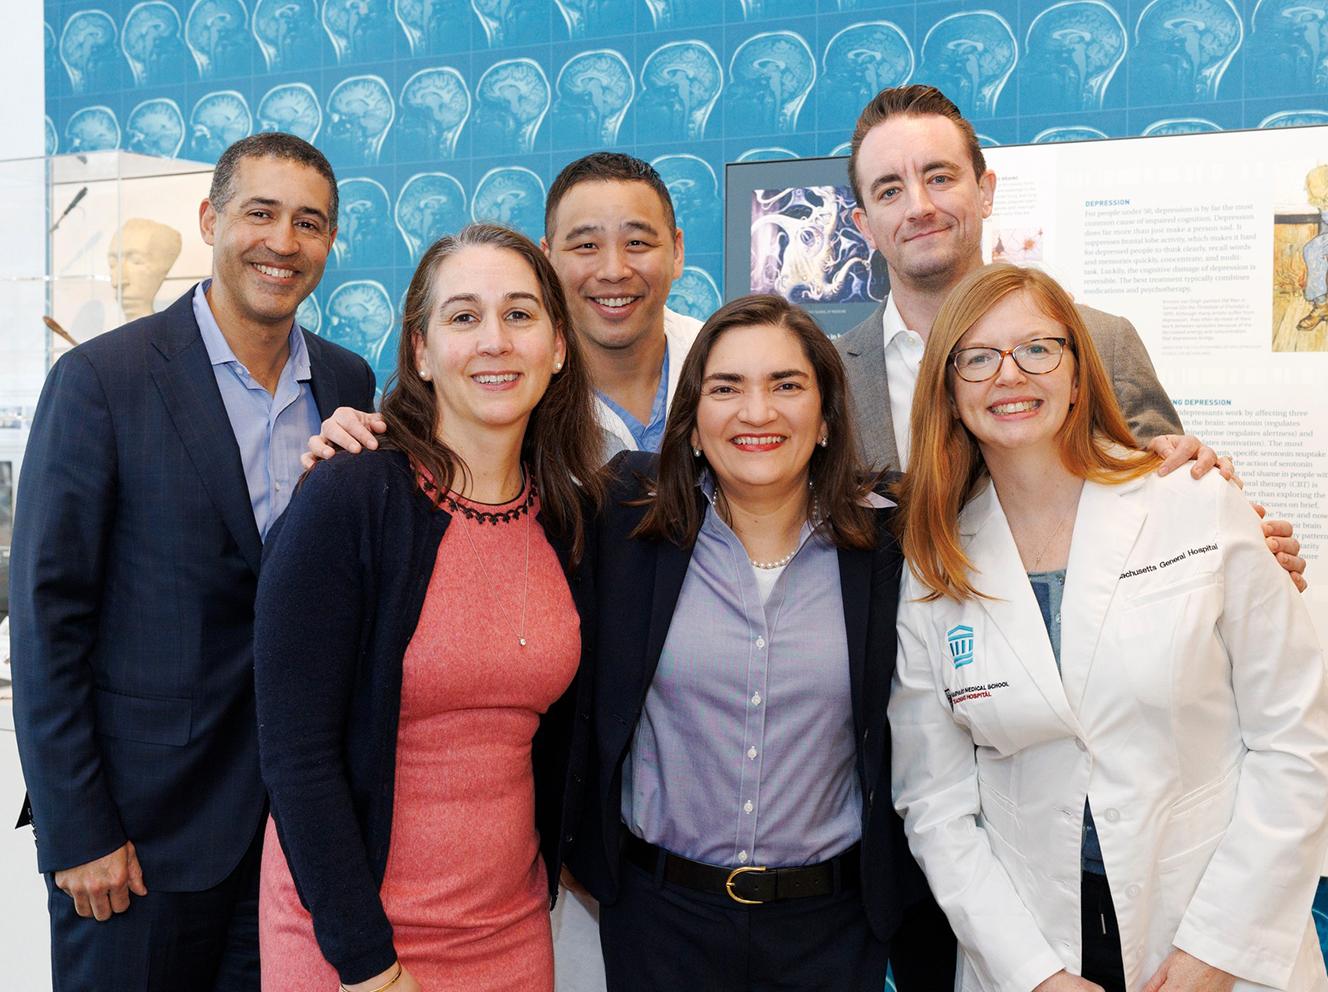 Members of Mass General Cancer Center's INCIPIENT team (from left to right): Elizabeth Gerstner, MD, William Curry, MD, Marcela Maus, MD, PhD, Bryan Choi, MD, PhD, Kathleen Gallagher, PhD and Matthew Frigault, MD.